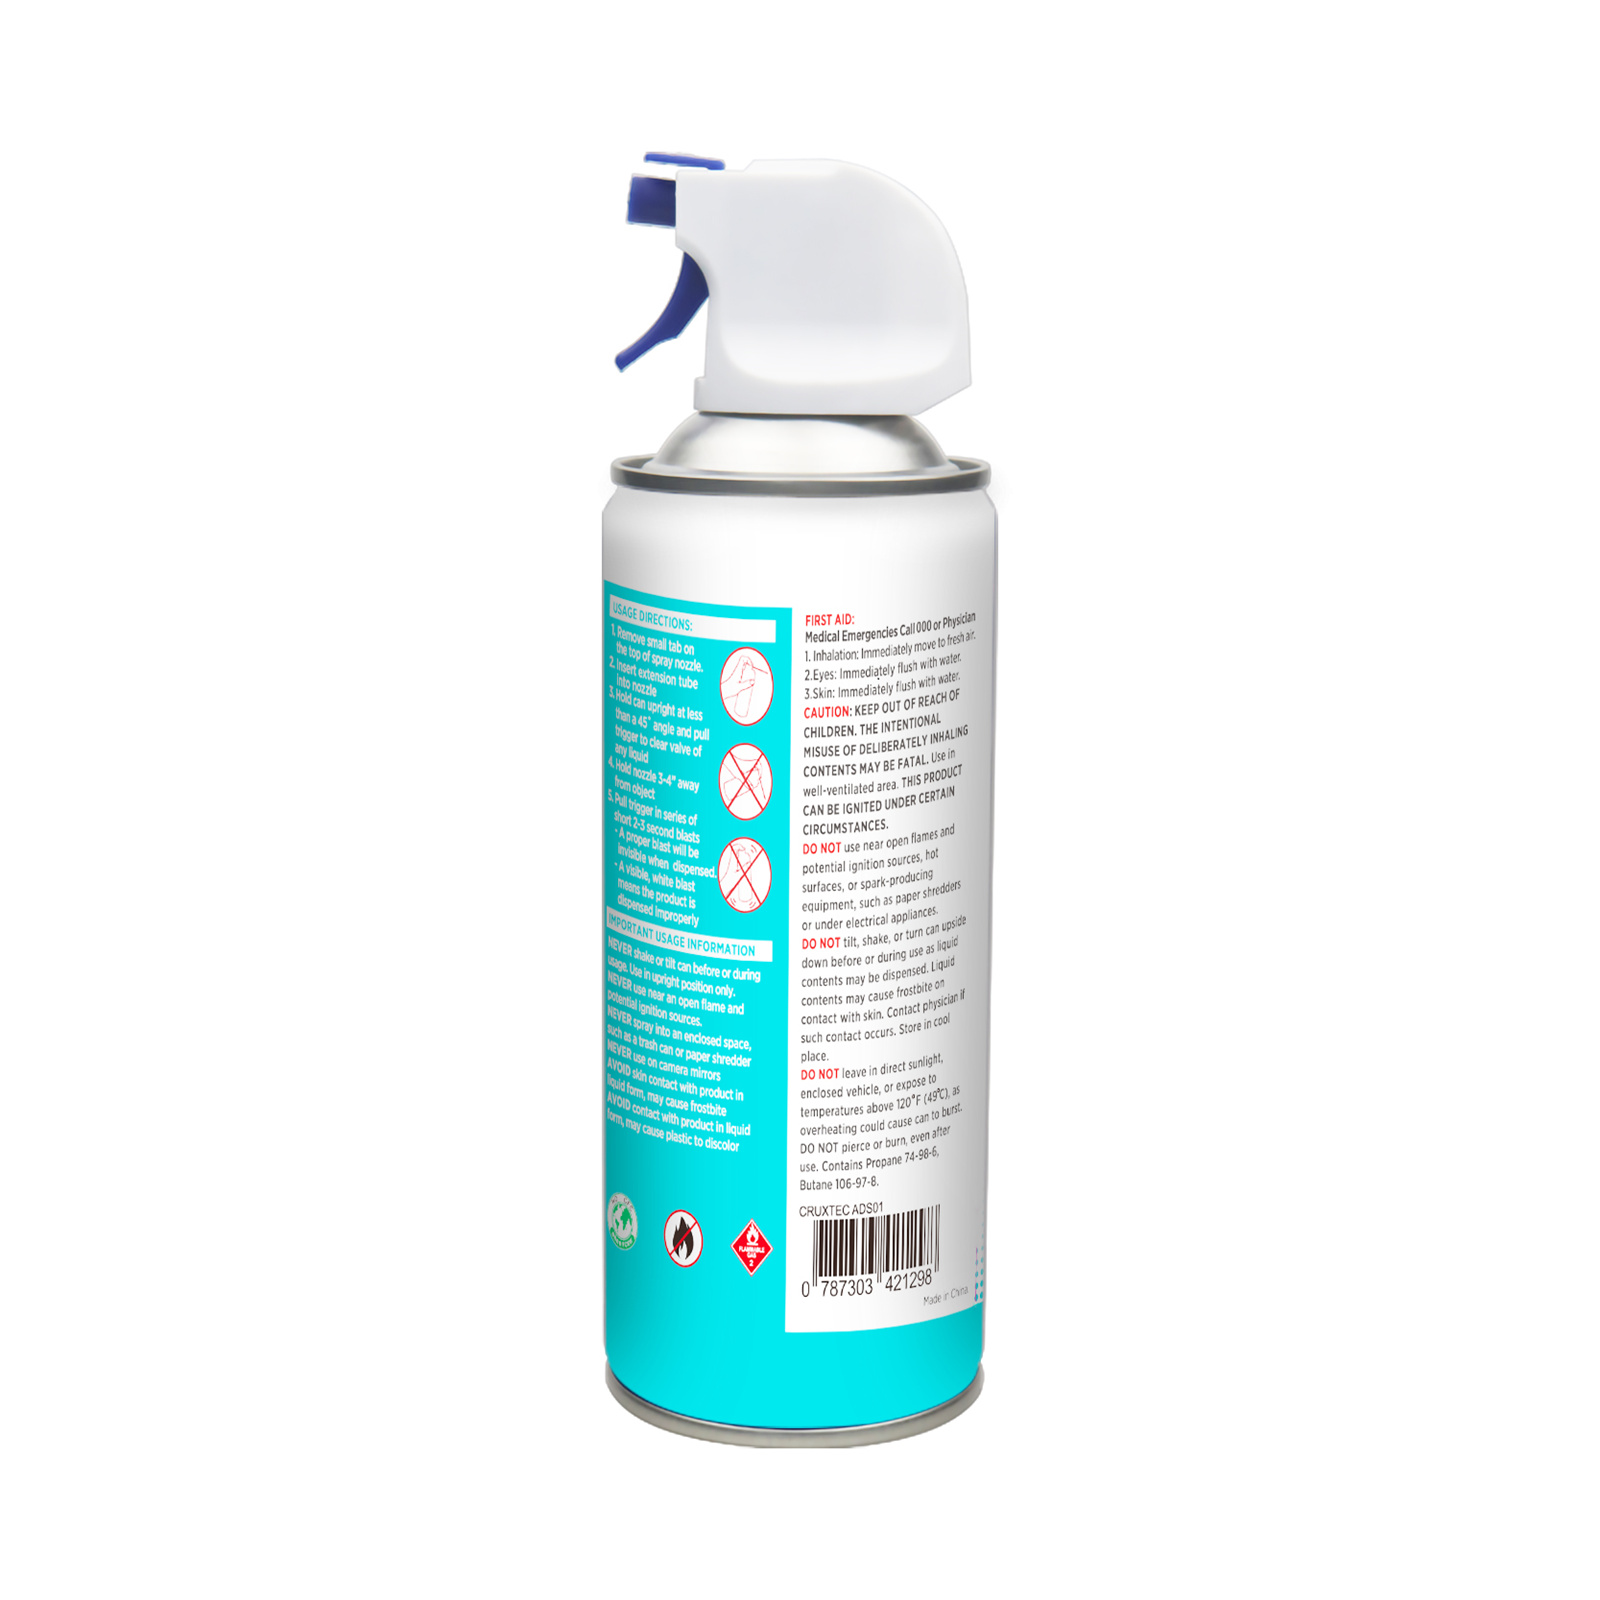 Dust-Air 6 x 400ml Compressed Air Duster Cleaner Spray Can Dust Air Camera  Fan